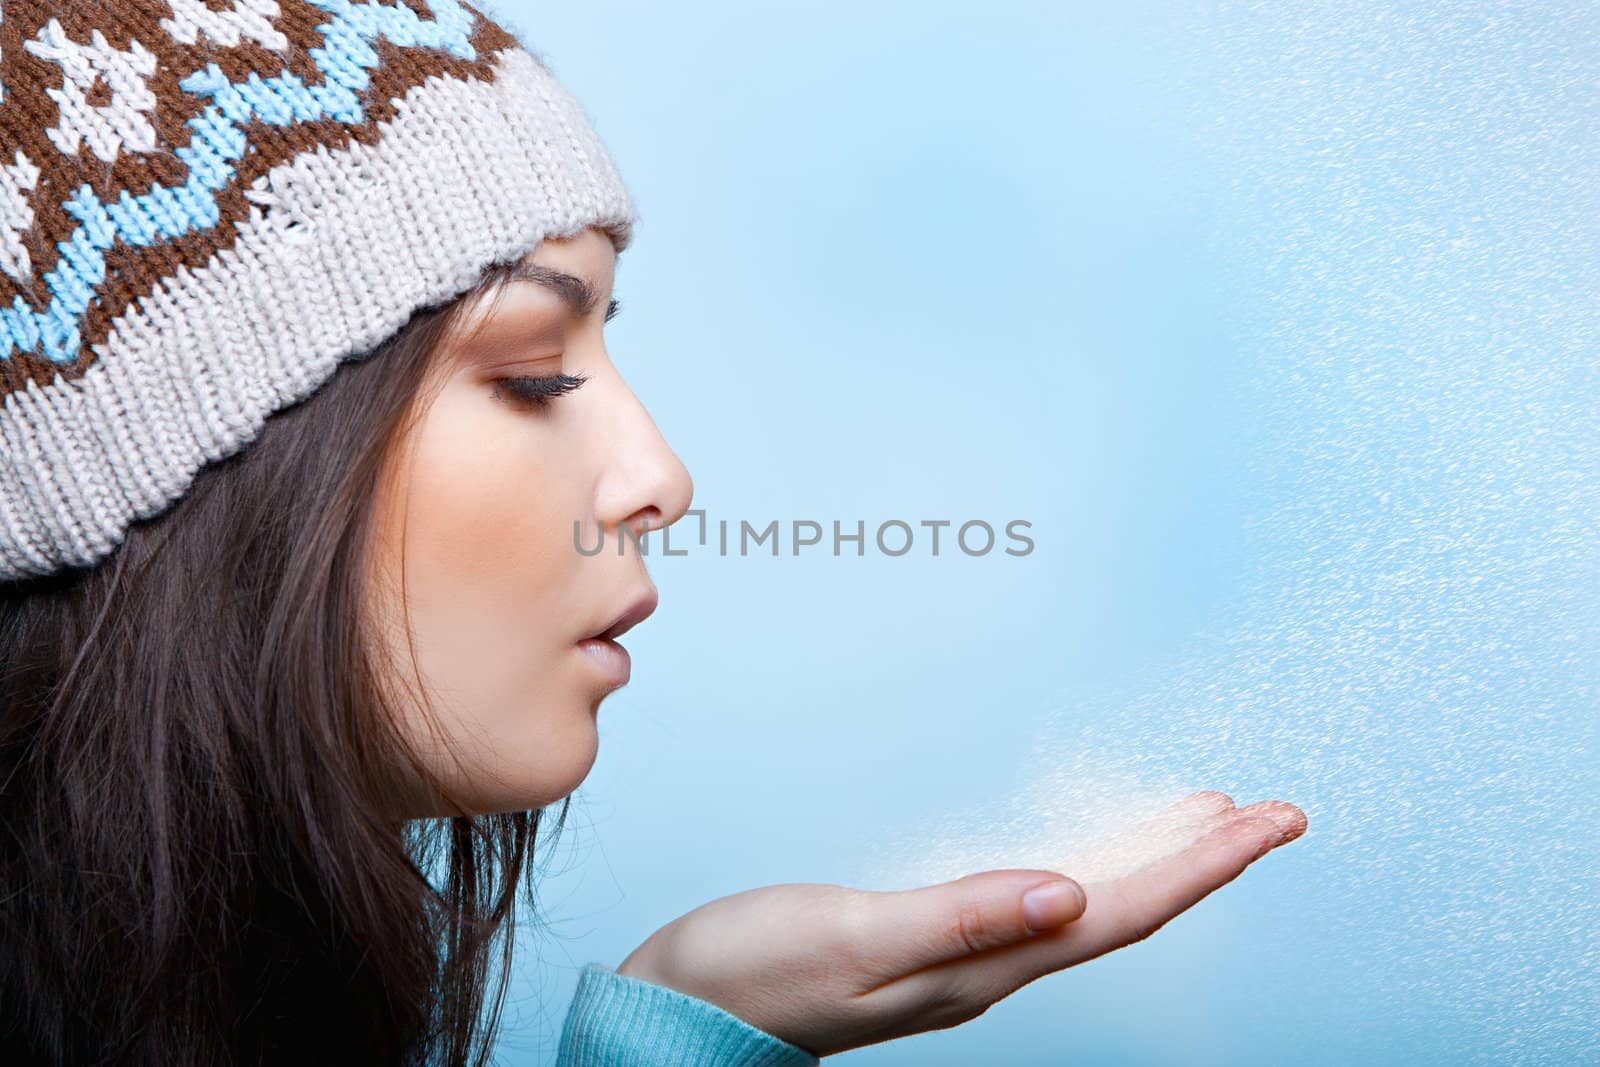 woman blows the snow on a blue background